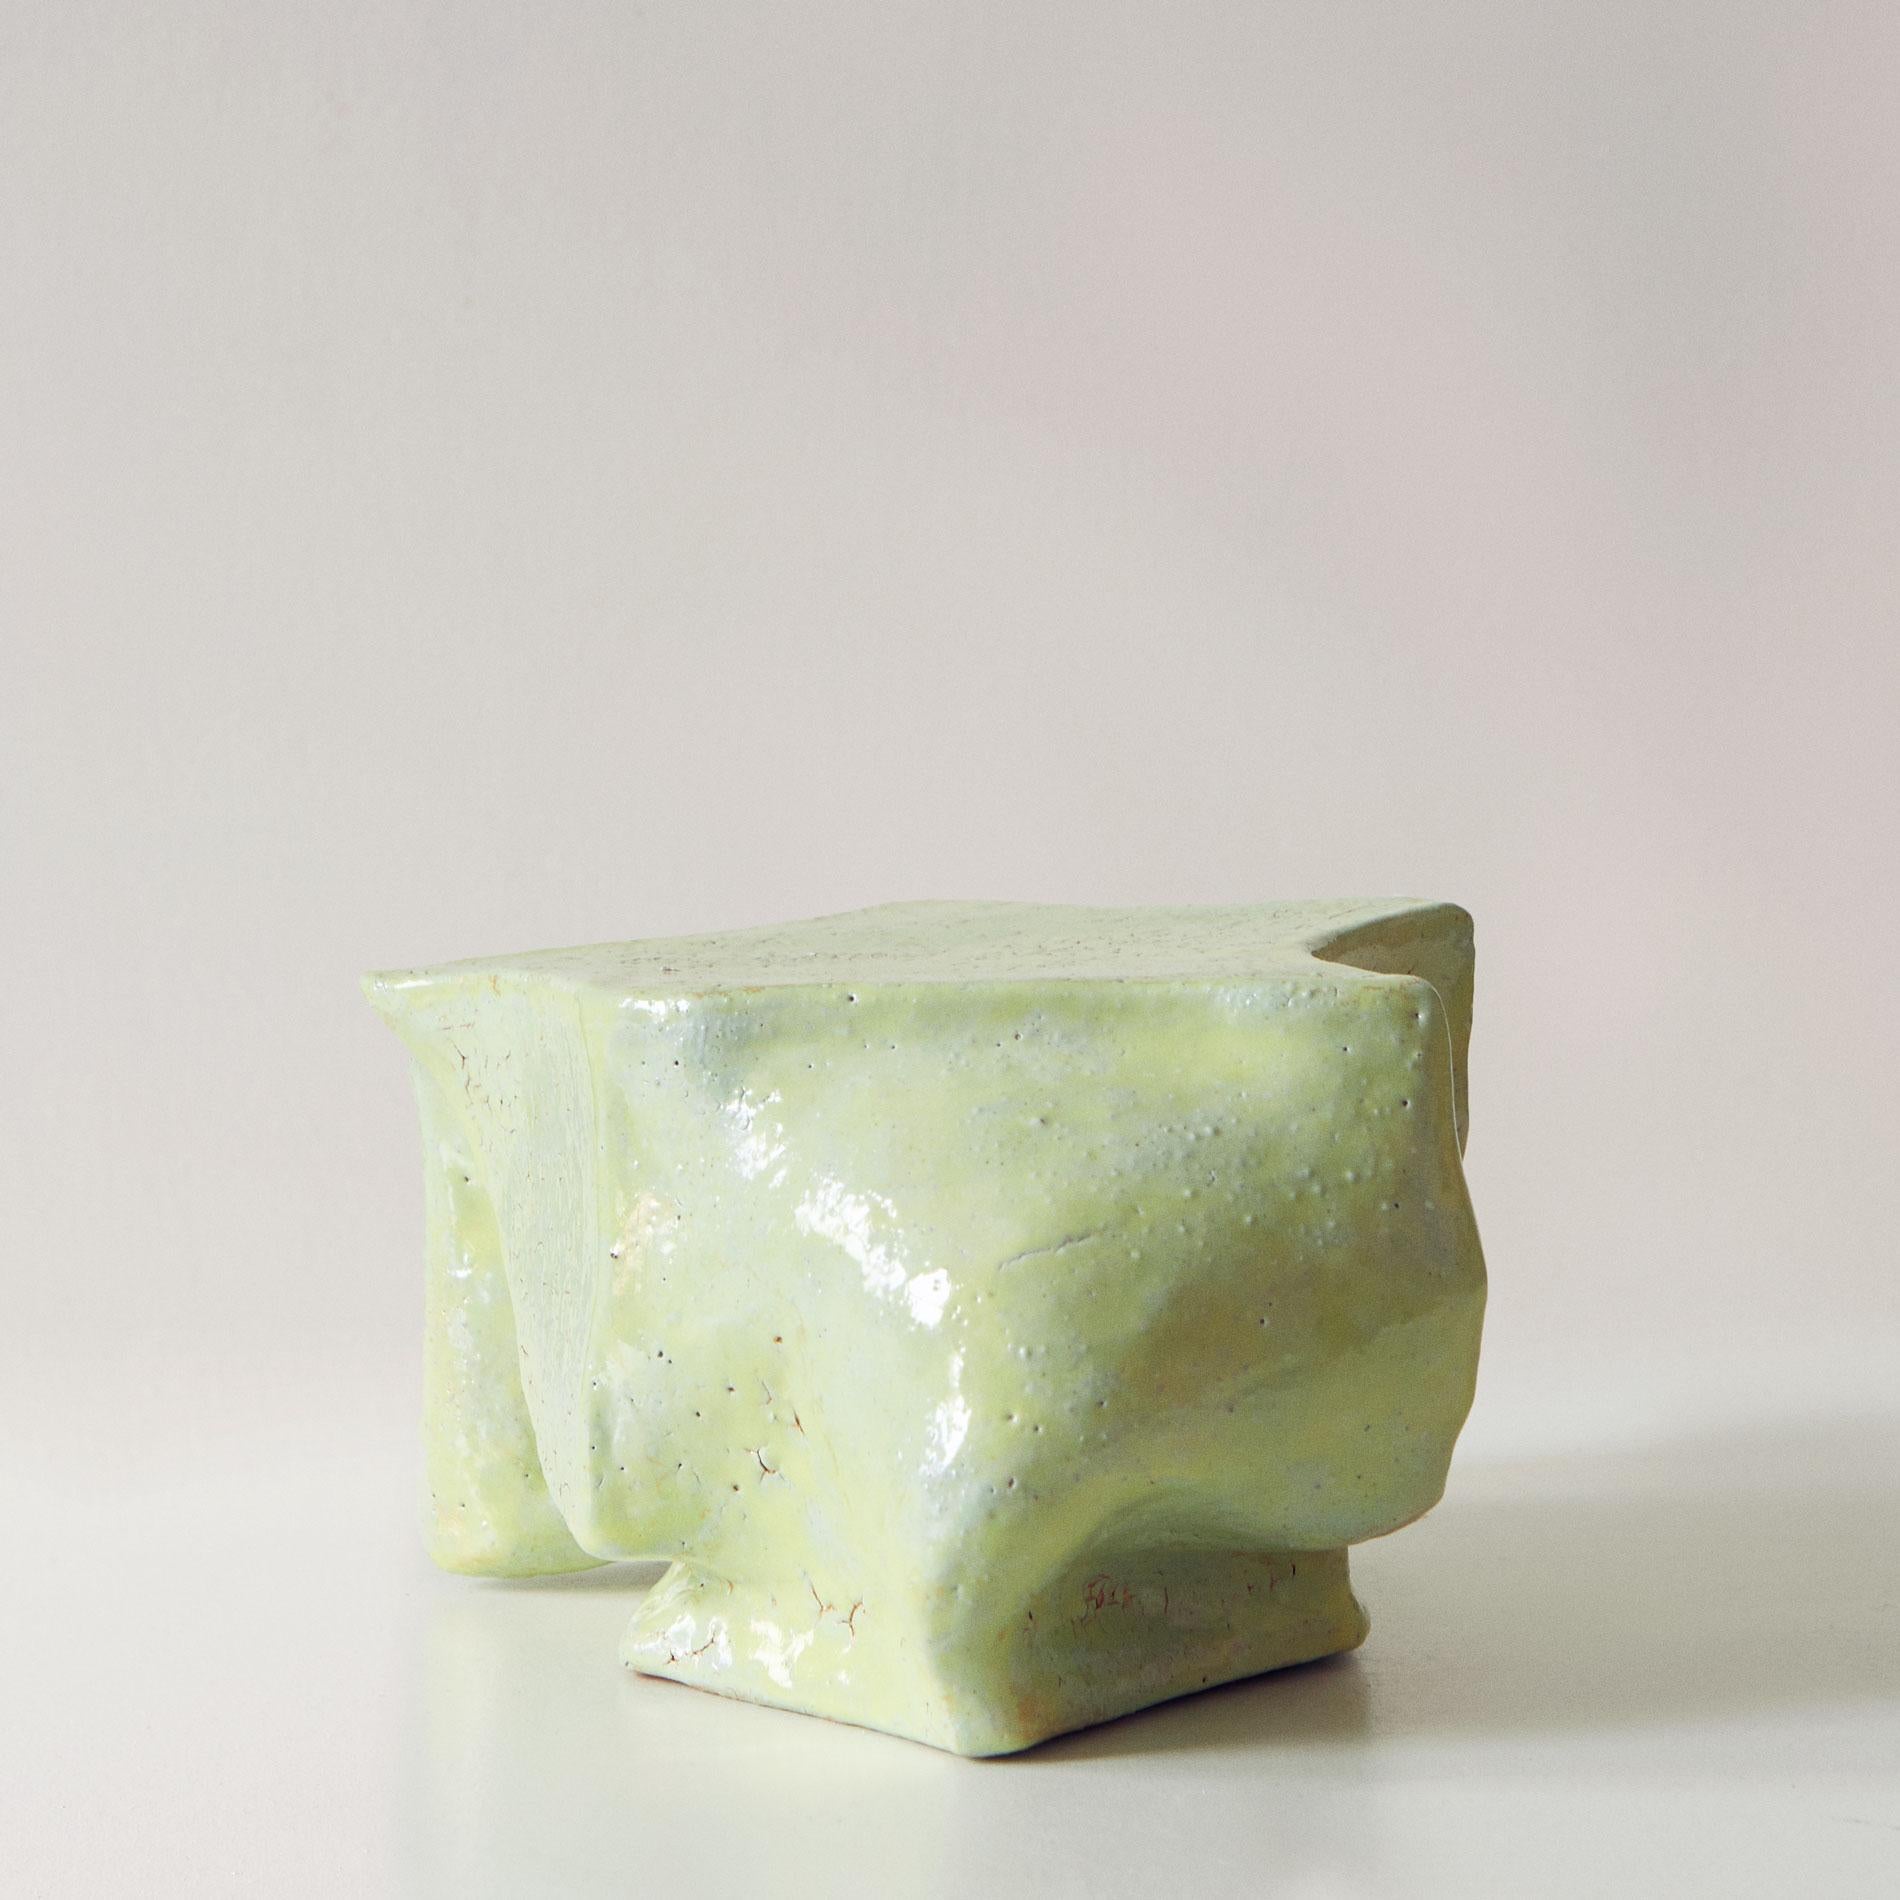 Shapeshifter XII - Modern Minimal Abstract Green Ceramic Sculpture - Gray Abstract Sculpture by Beatrice Galletley